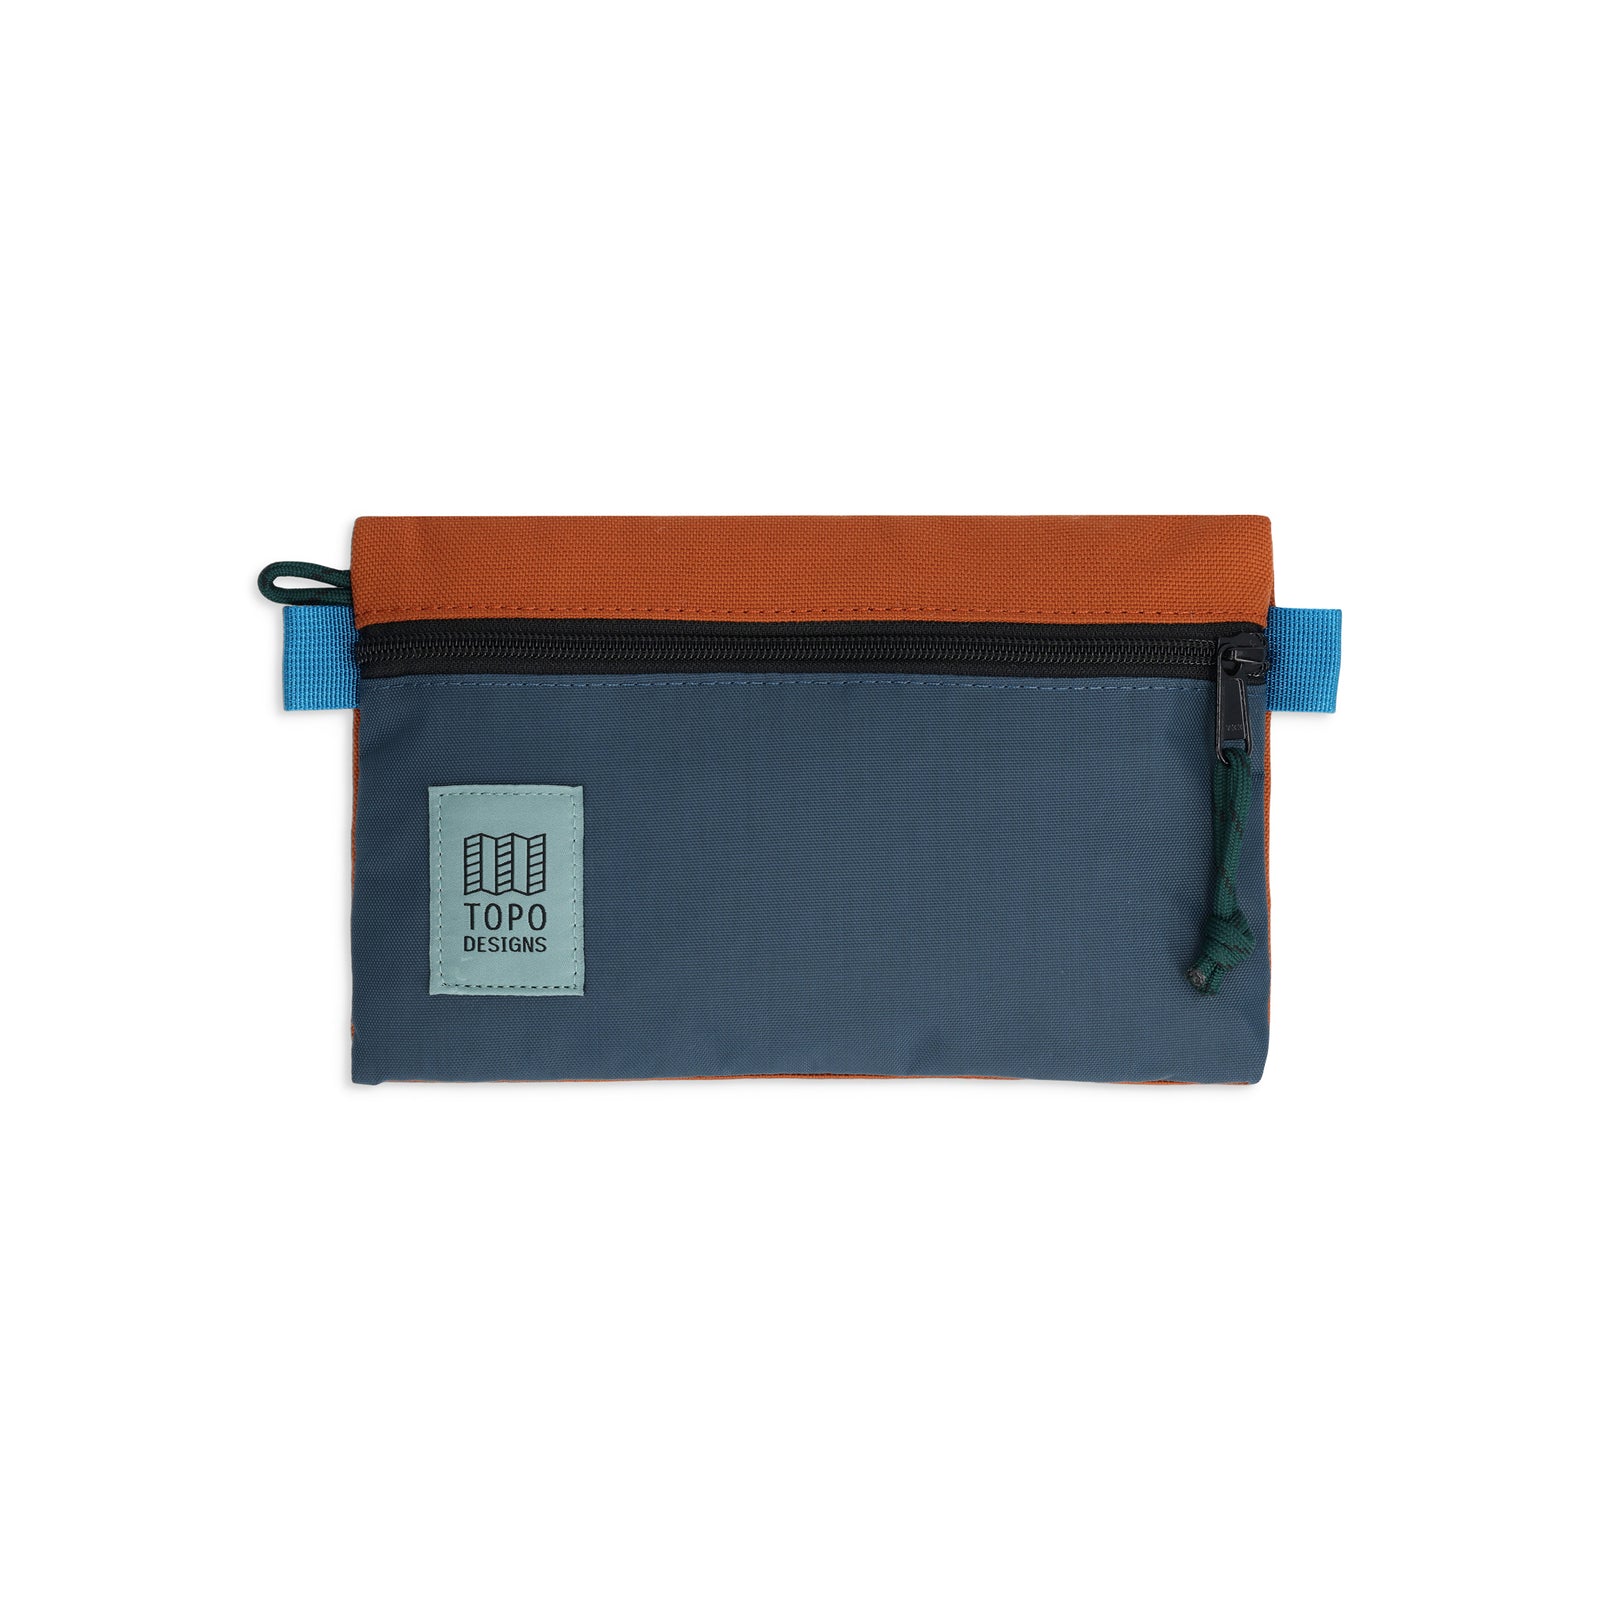 Topo Designs Accessory Bag in "Small" "Clay / Pond Blue - Recycled" 